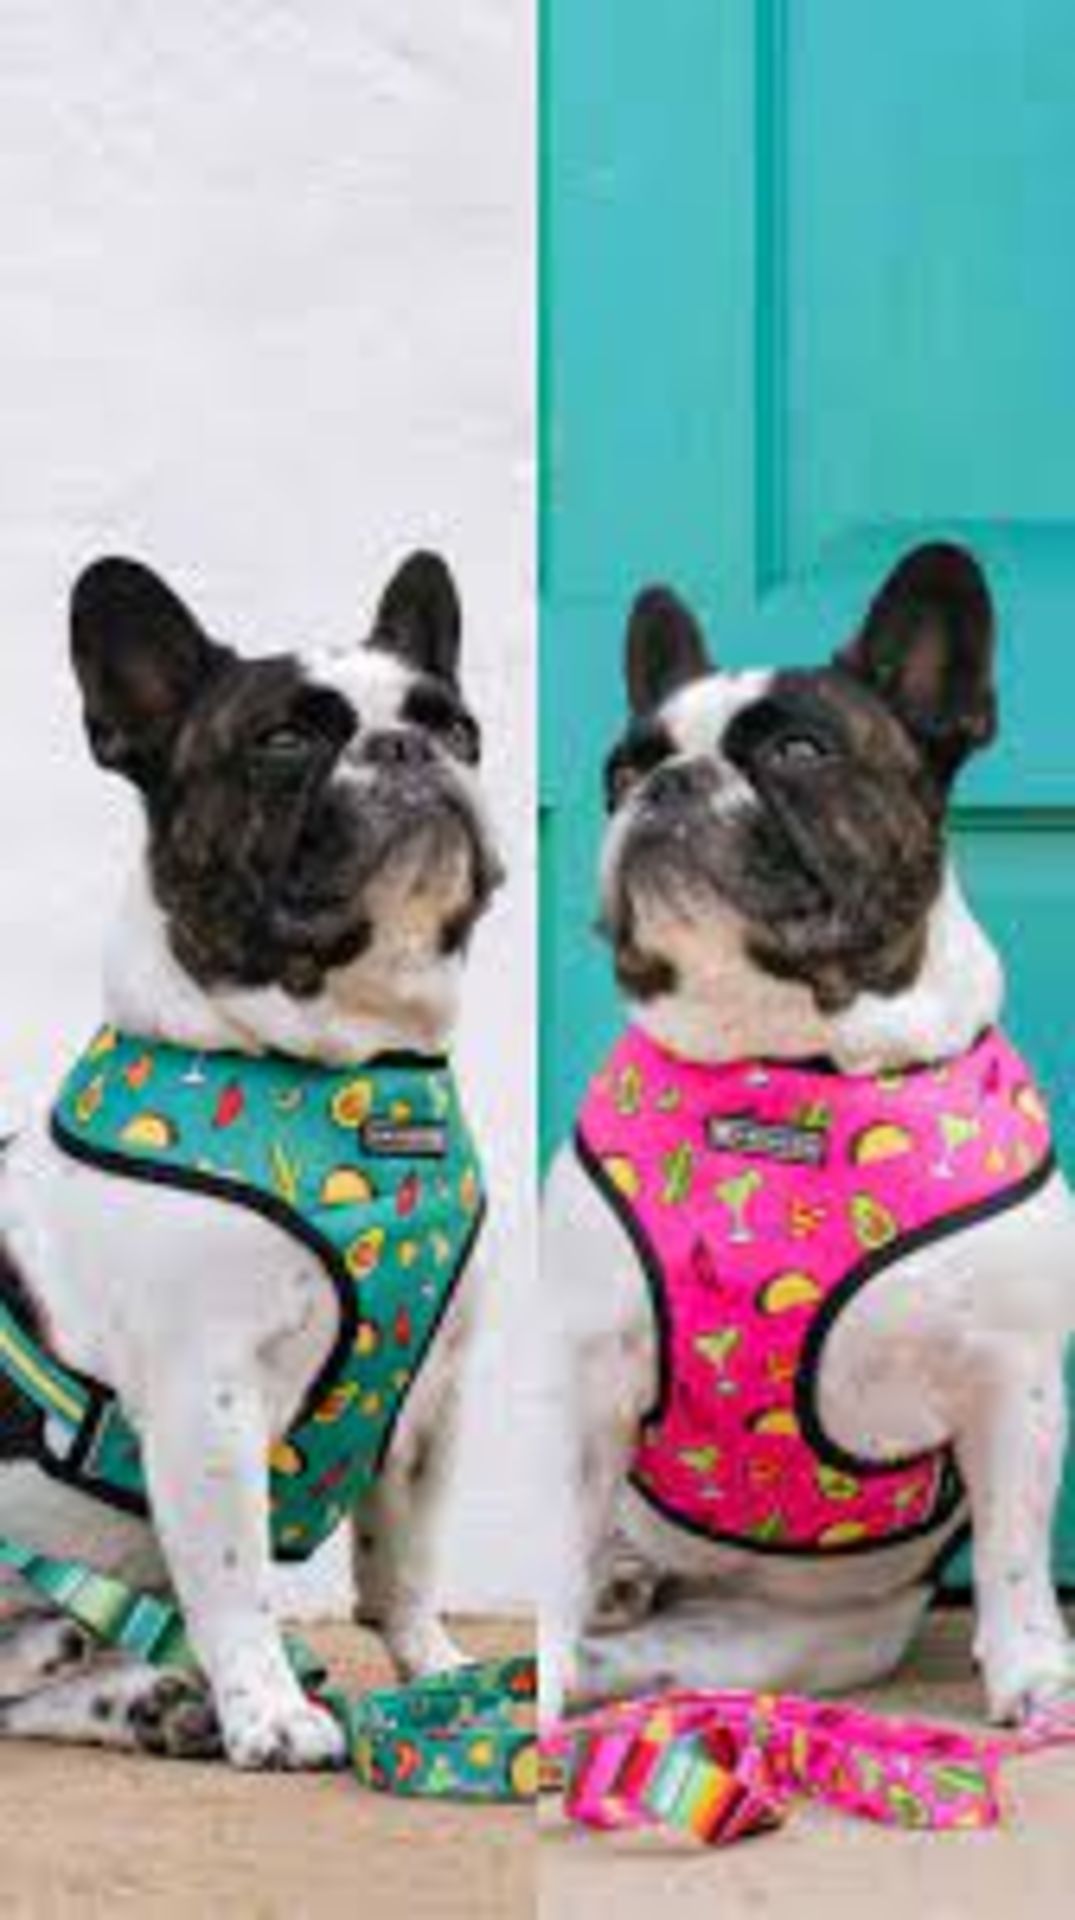 Trade Lot 100 X New .Packaged Frenchie The Bulldog Luxury Branded Dog Products. May include items - Image 22 of 50